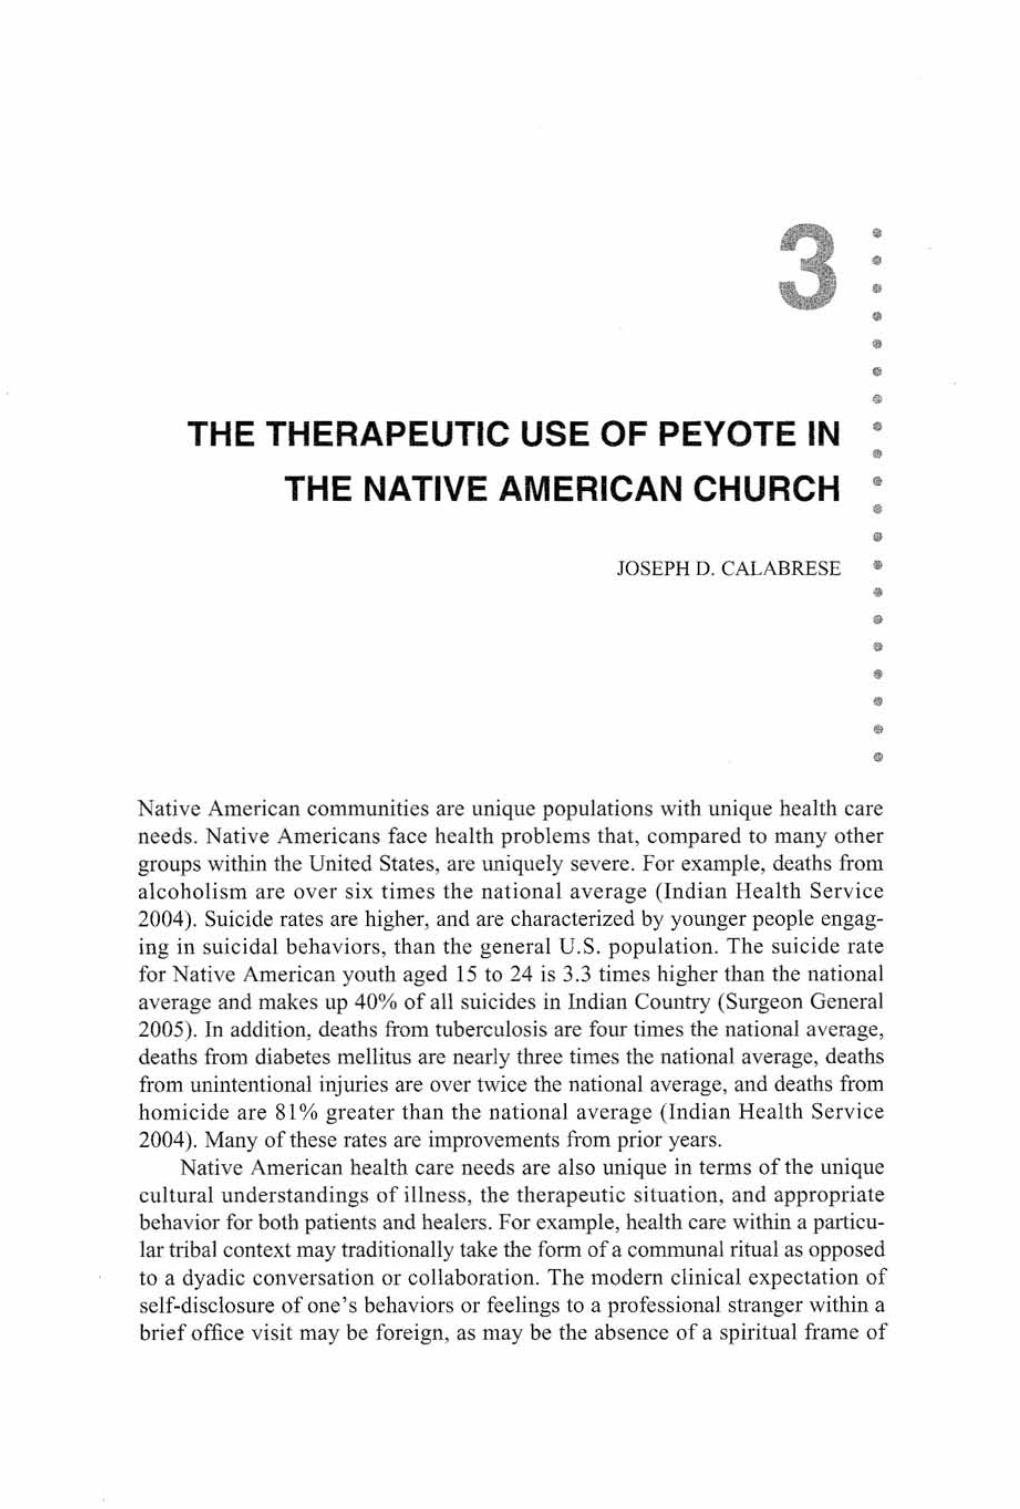 The Therapeutic Use of Peyote in the Native American Church